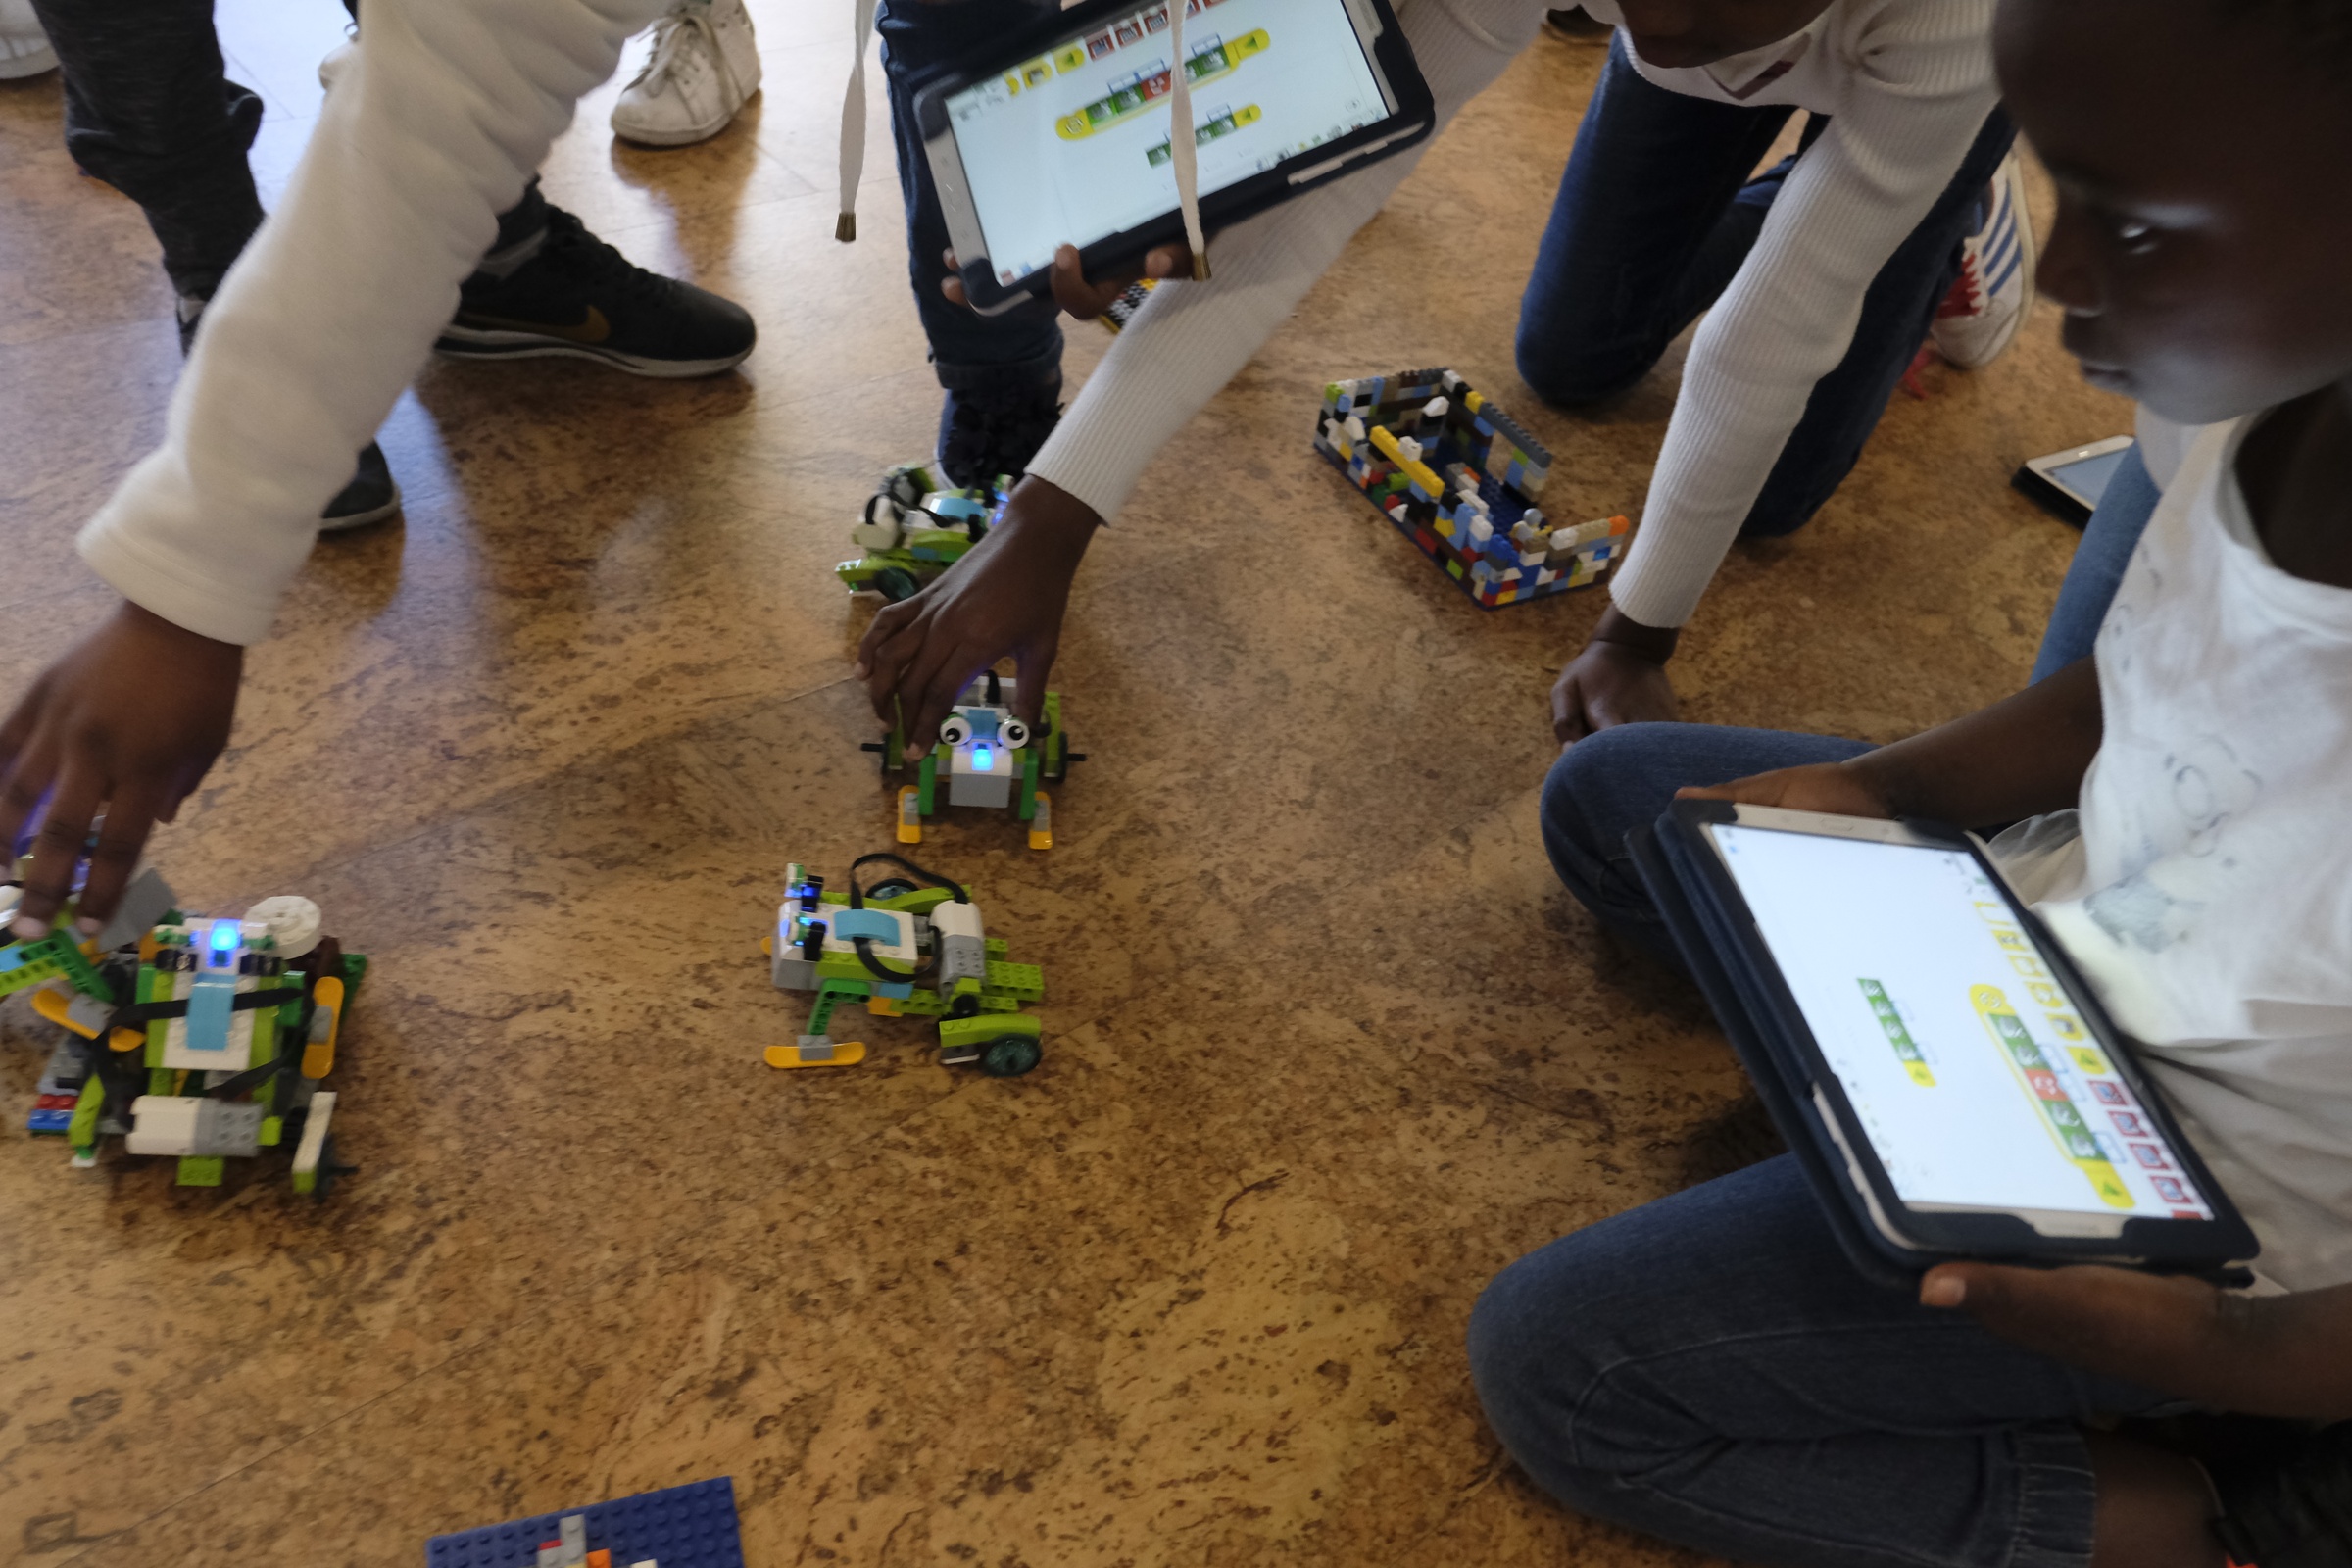 Event photograph from the Lego Robotics workshop by ORT SA CAPE on A4’s top floor shows children playing with robotic lego toys and tablet computers.
